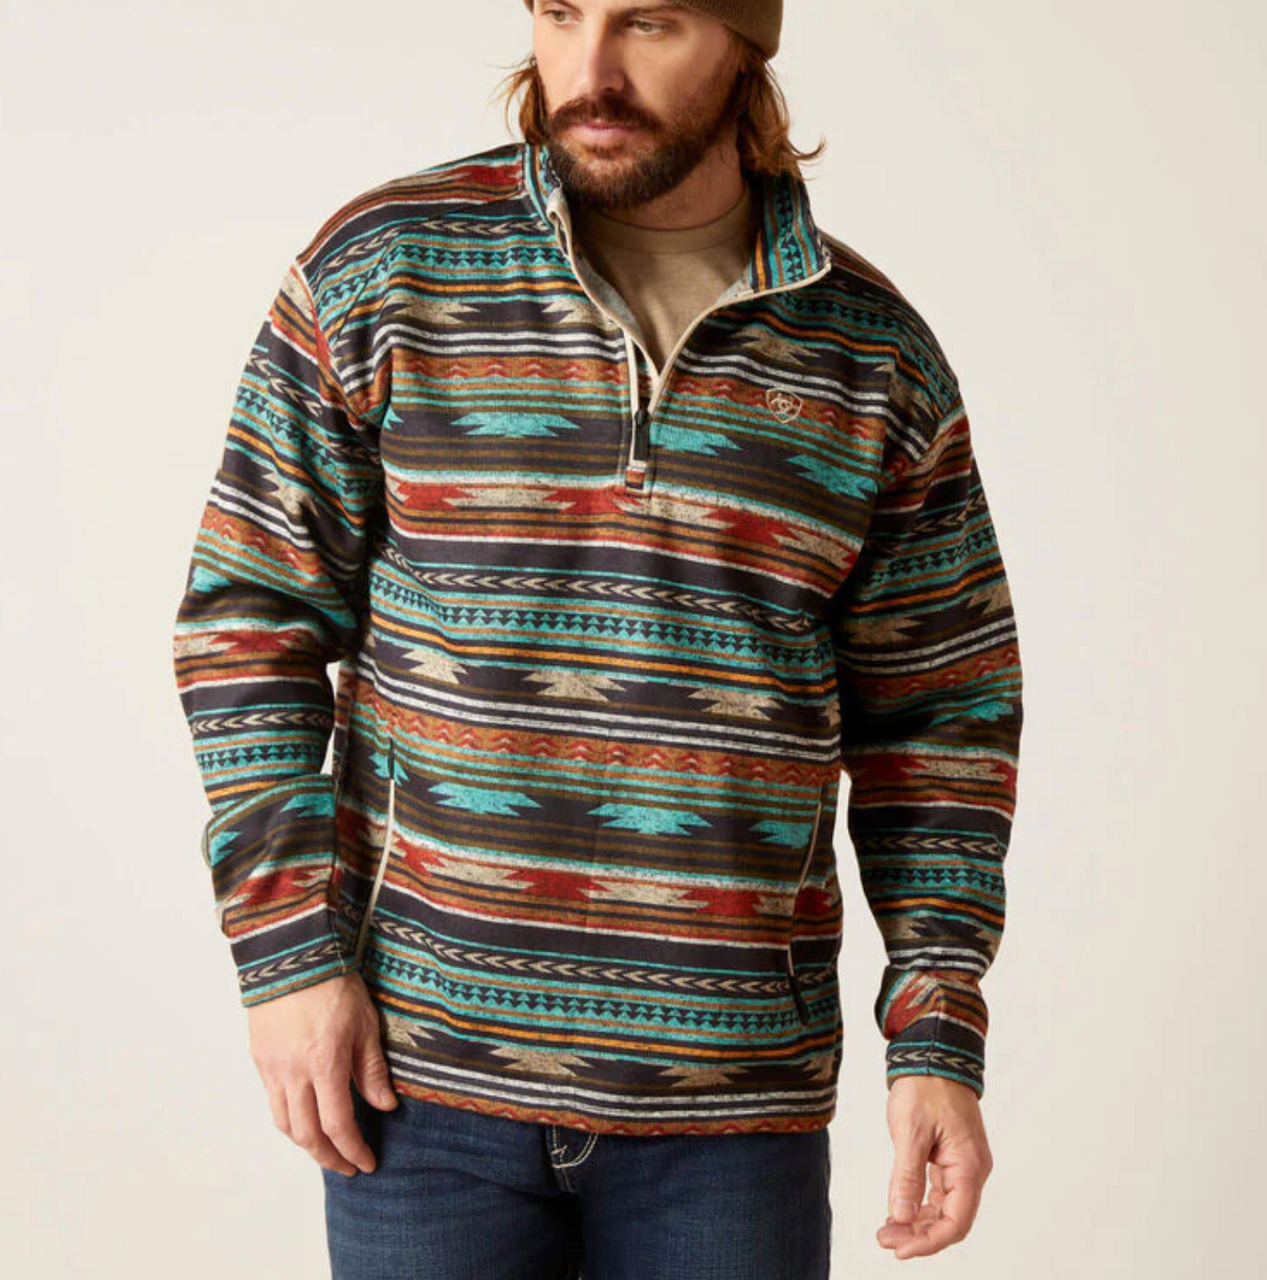 MEN'S ARIAT BISCAY BAY SERAPE Caldwell 1/4 ZIP SWEATER - OLD FORT WESTERN